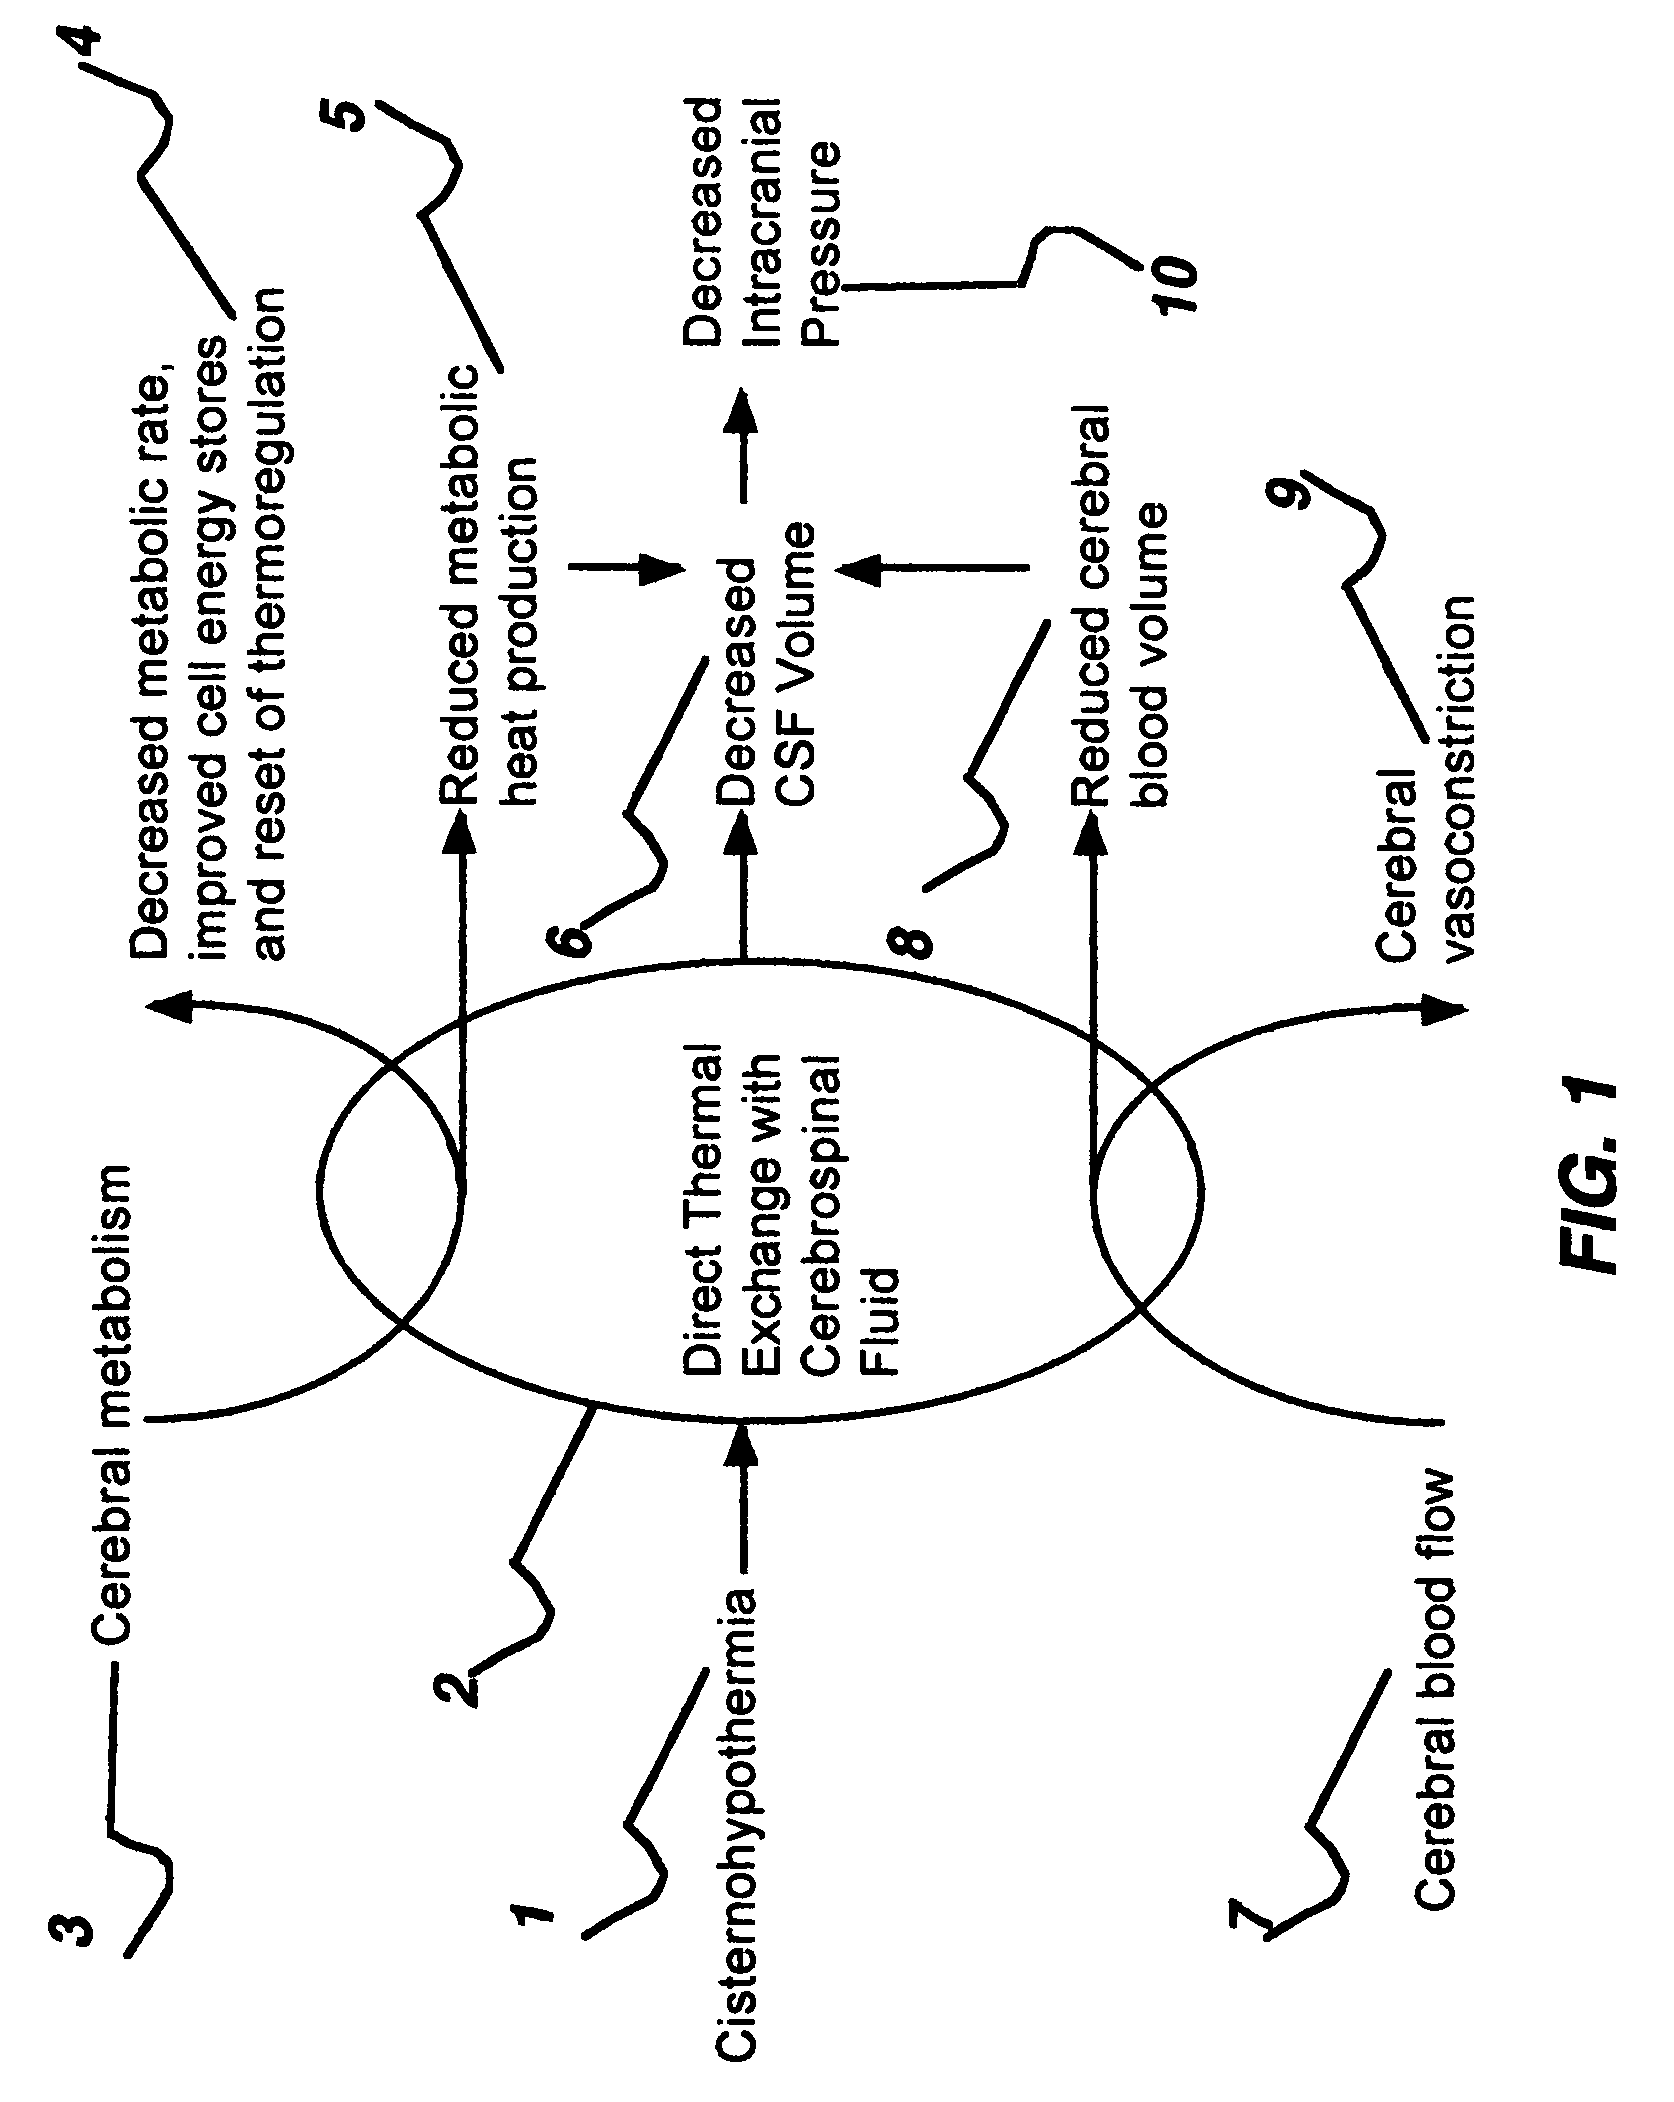 Apparatus and method for hypothermia and rewarming by altering the temperature of the cerebrospinal fluid in the brain